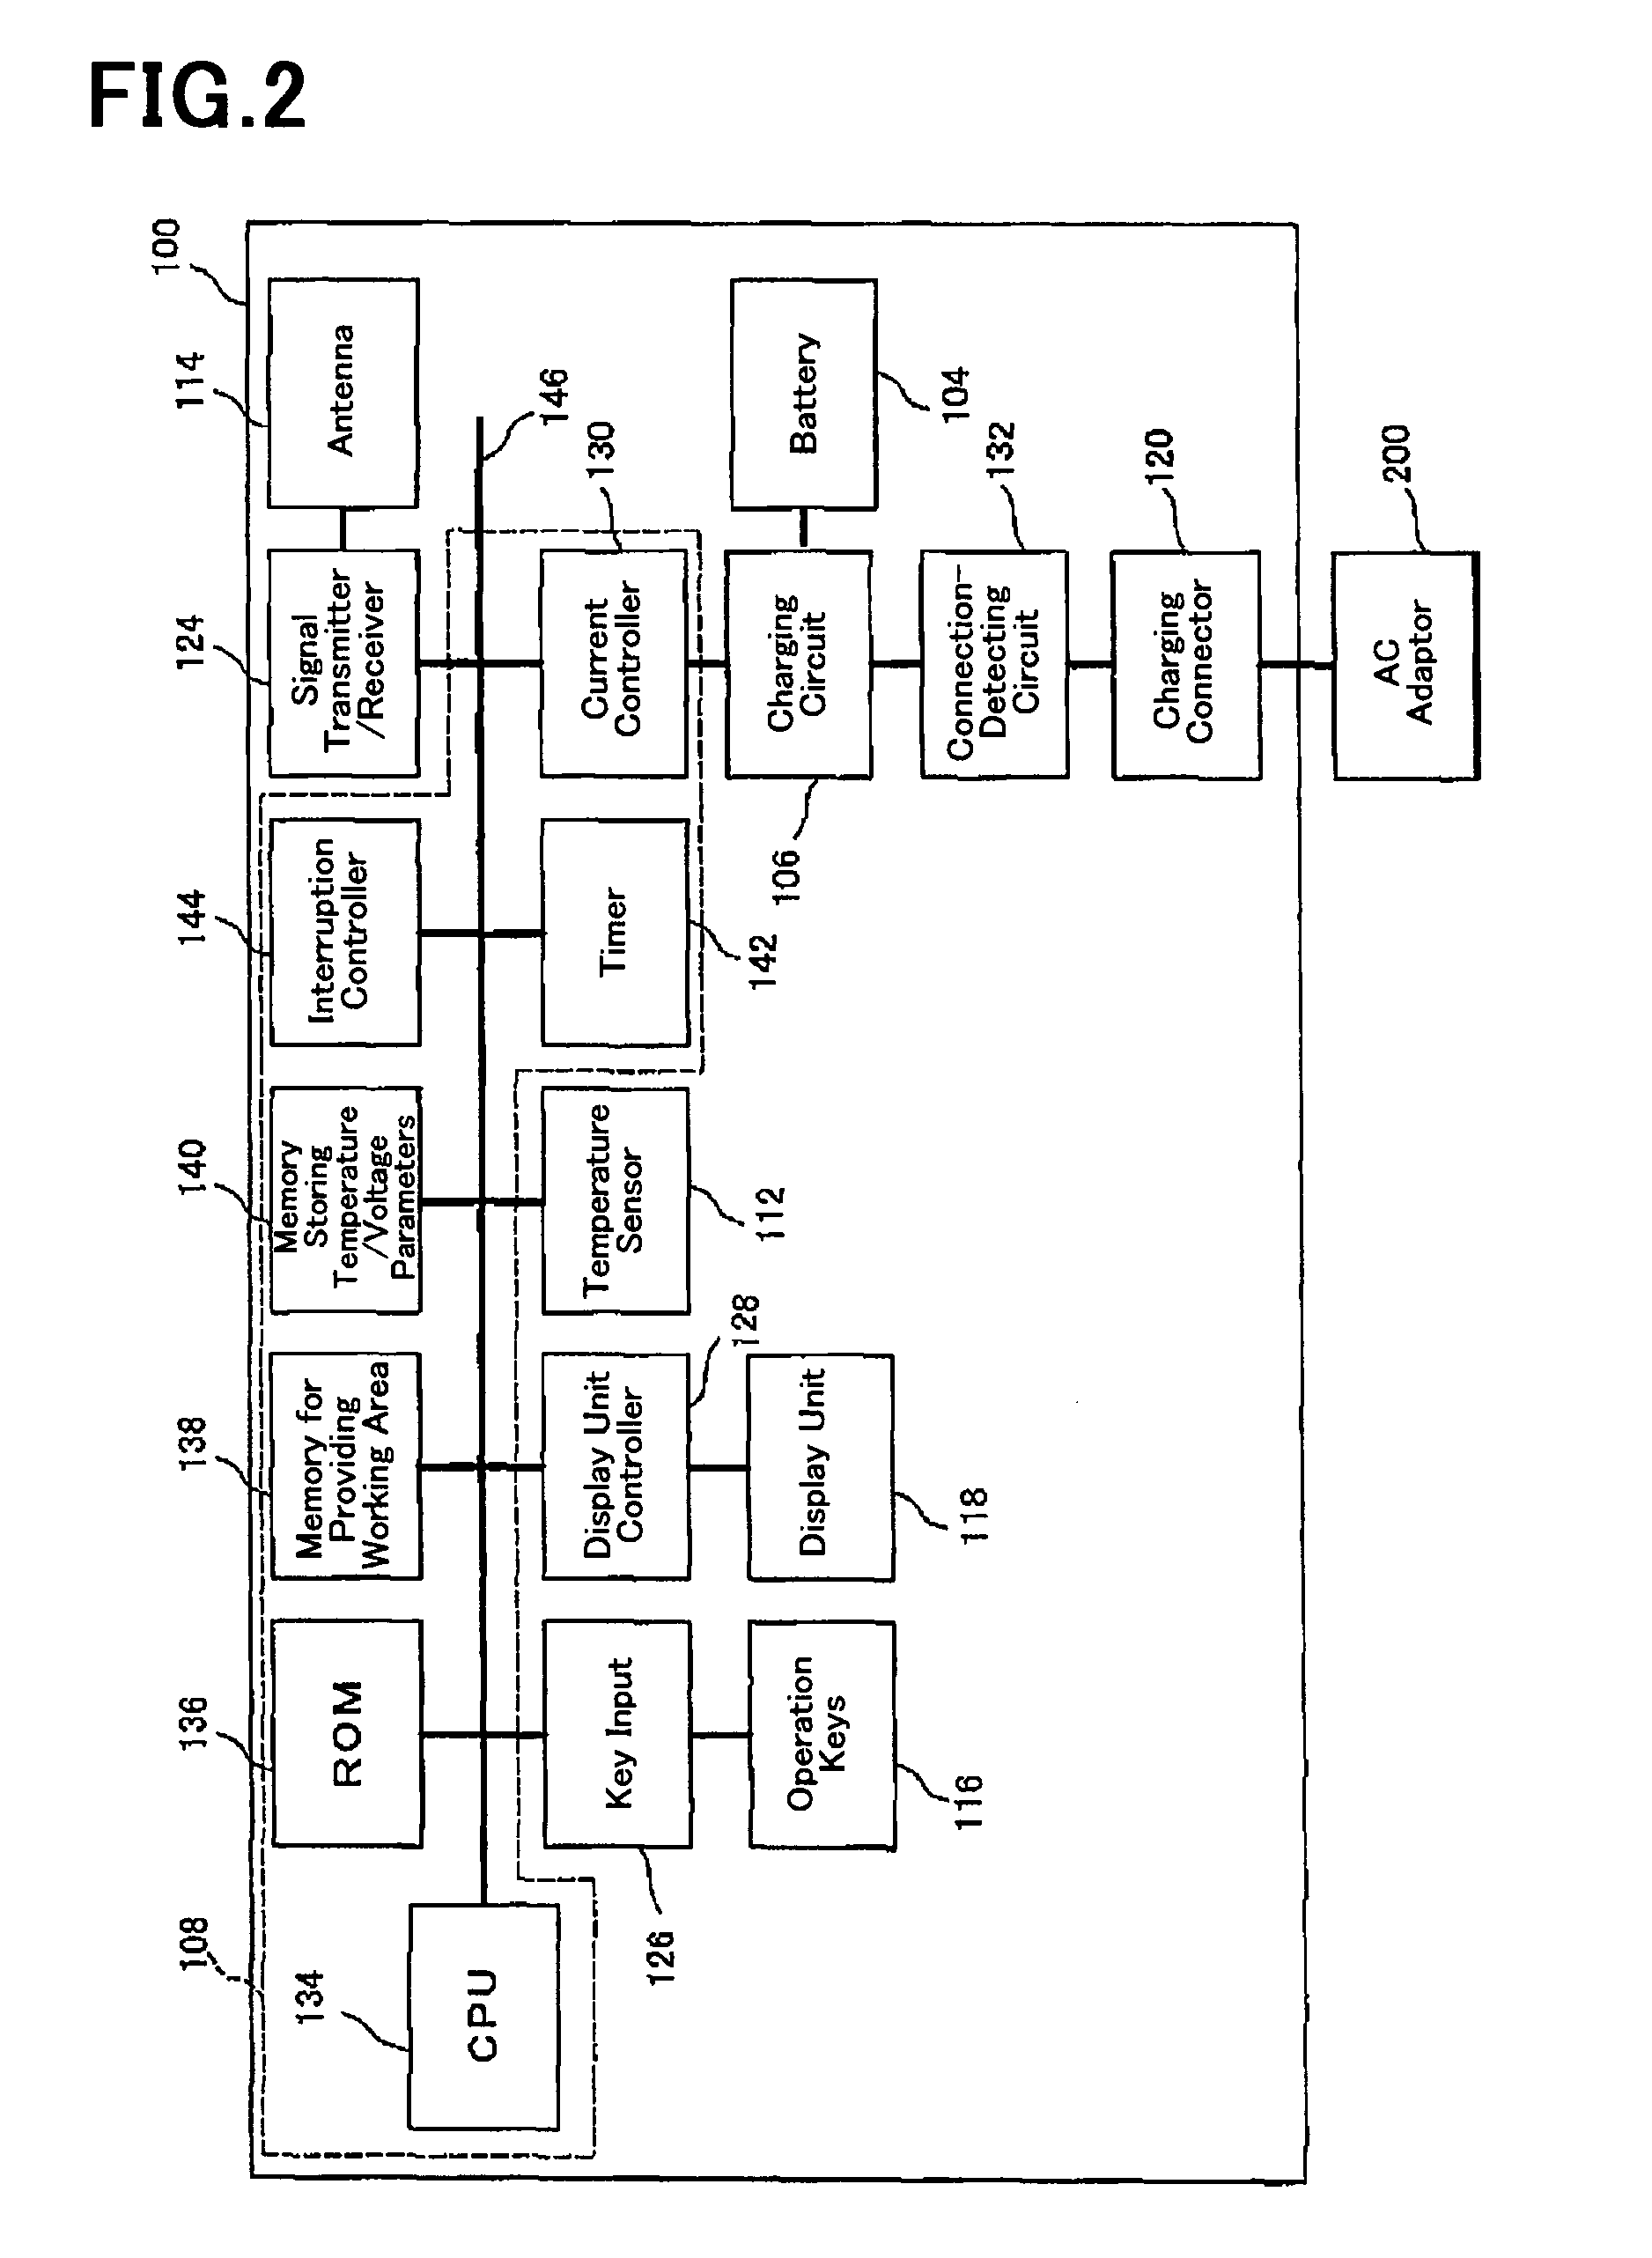 Mobile terminal with a temperature sensor and method of charging battery mounted in mobile terminal